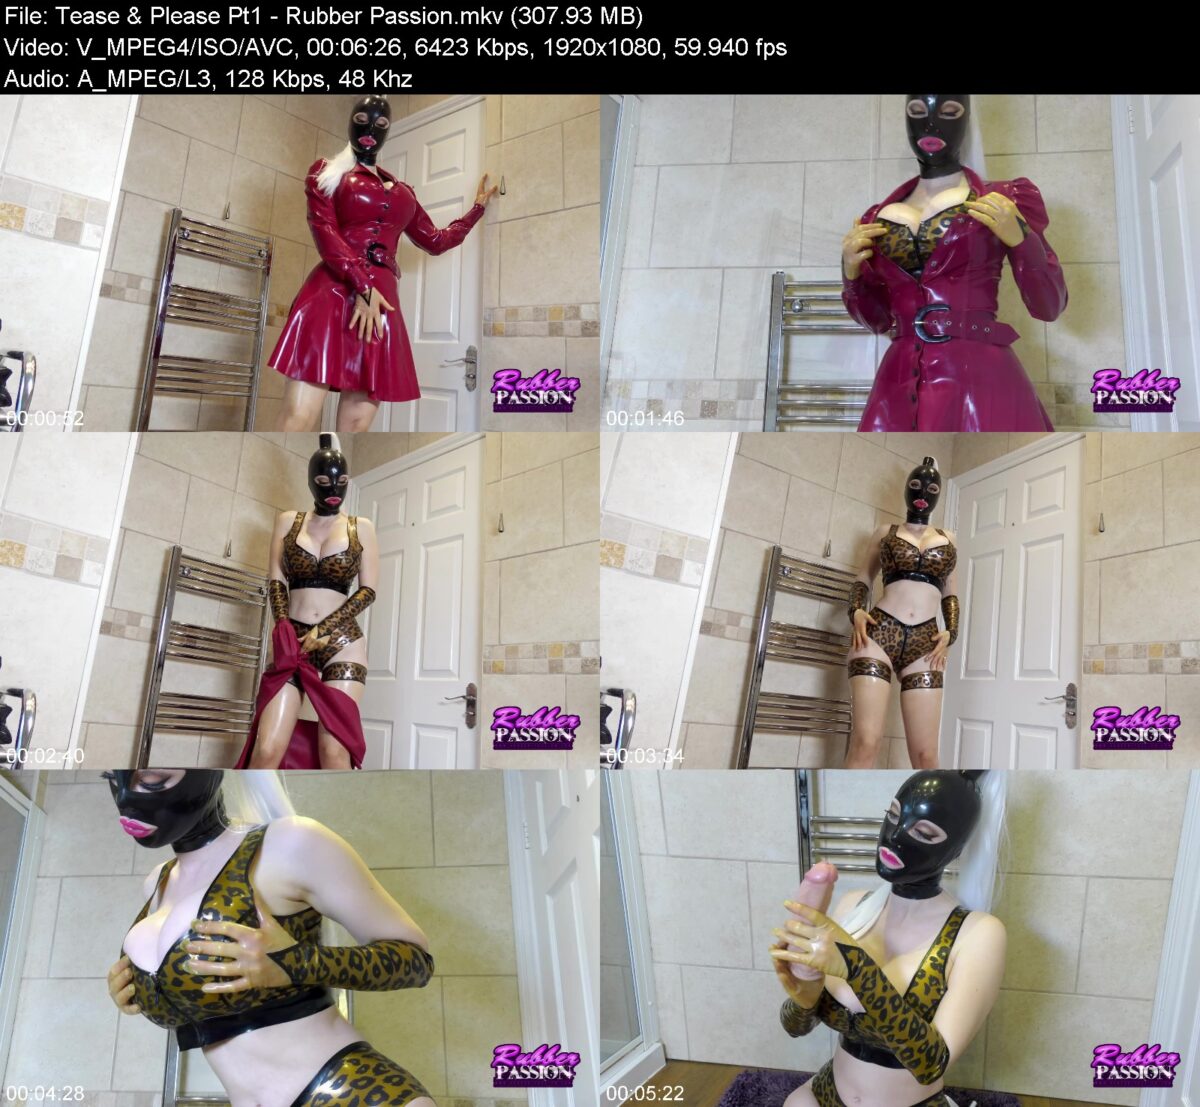 Actress: Tease & Please Pt1. Title and Studio: Rubber Passion